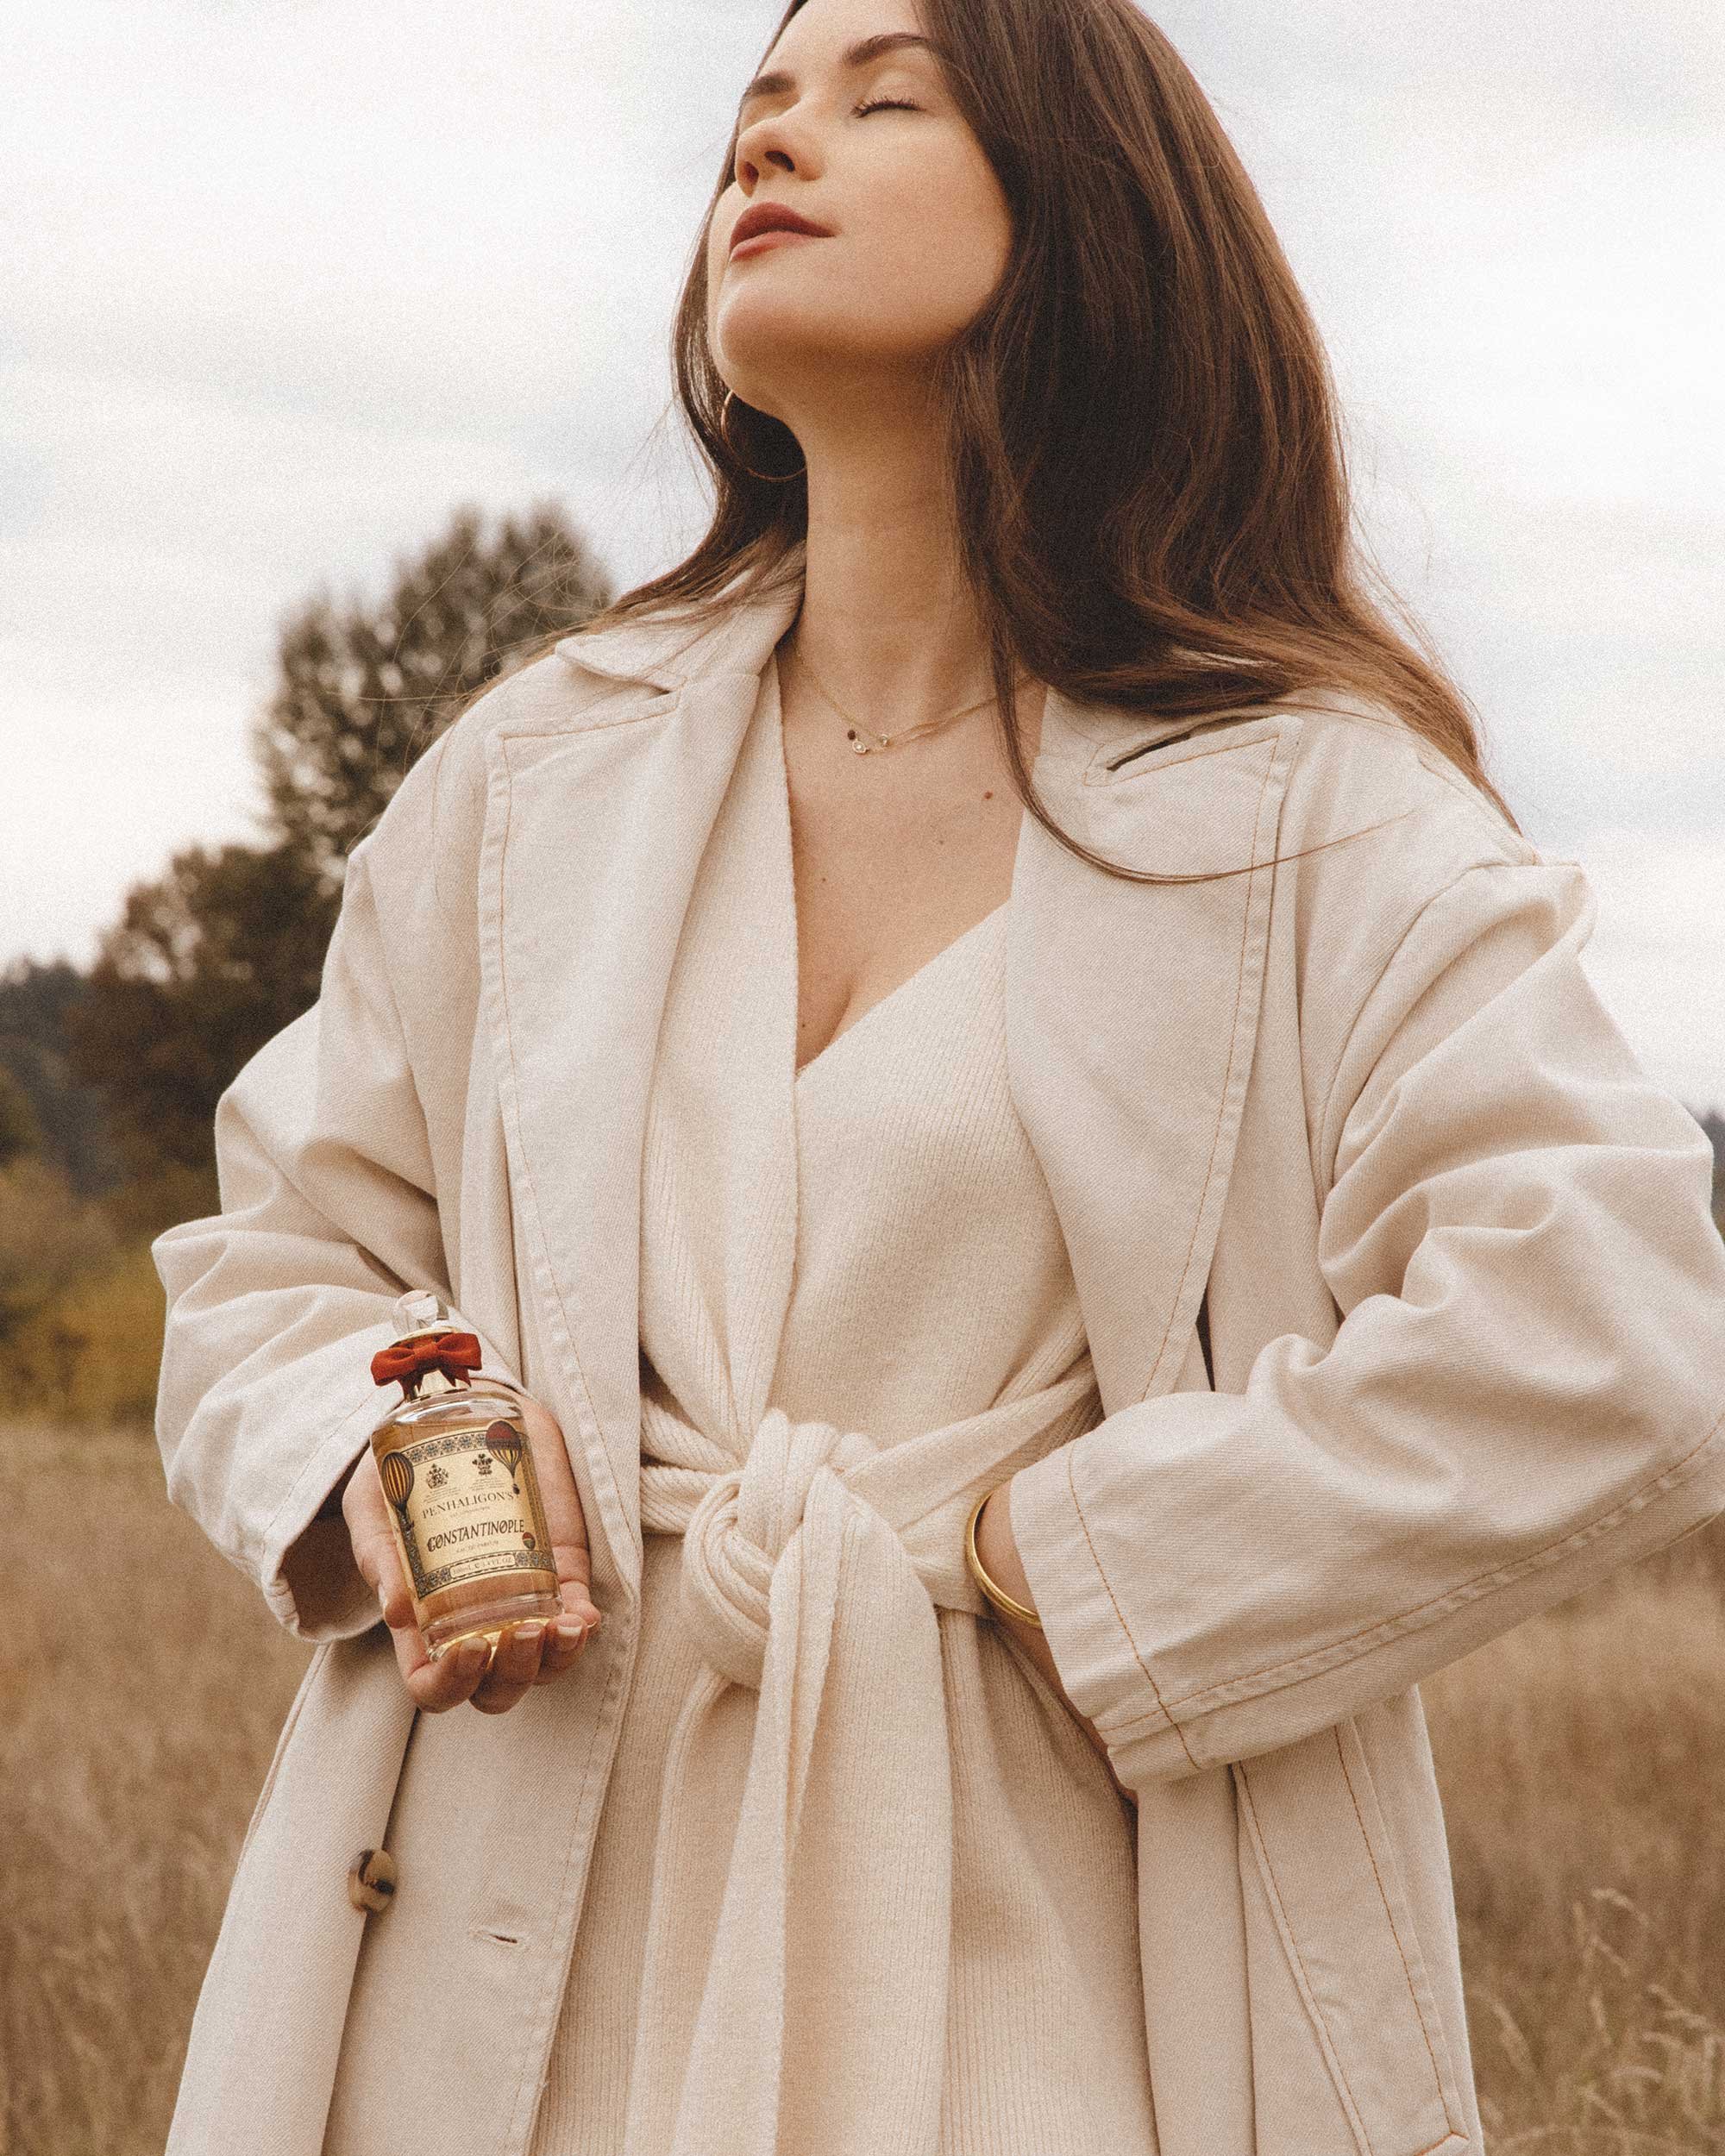 Neutral Fall Outfit Idea. Sarah Butler of @sarahchristine wearing Penhaligon Constantinople Eau De Parfum A fragrance created for the Queen of Cities, where elegant florals collide with warm, earthy aromas in Seattle, Washington. 3.jpg